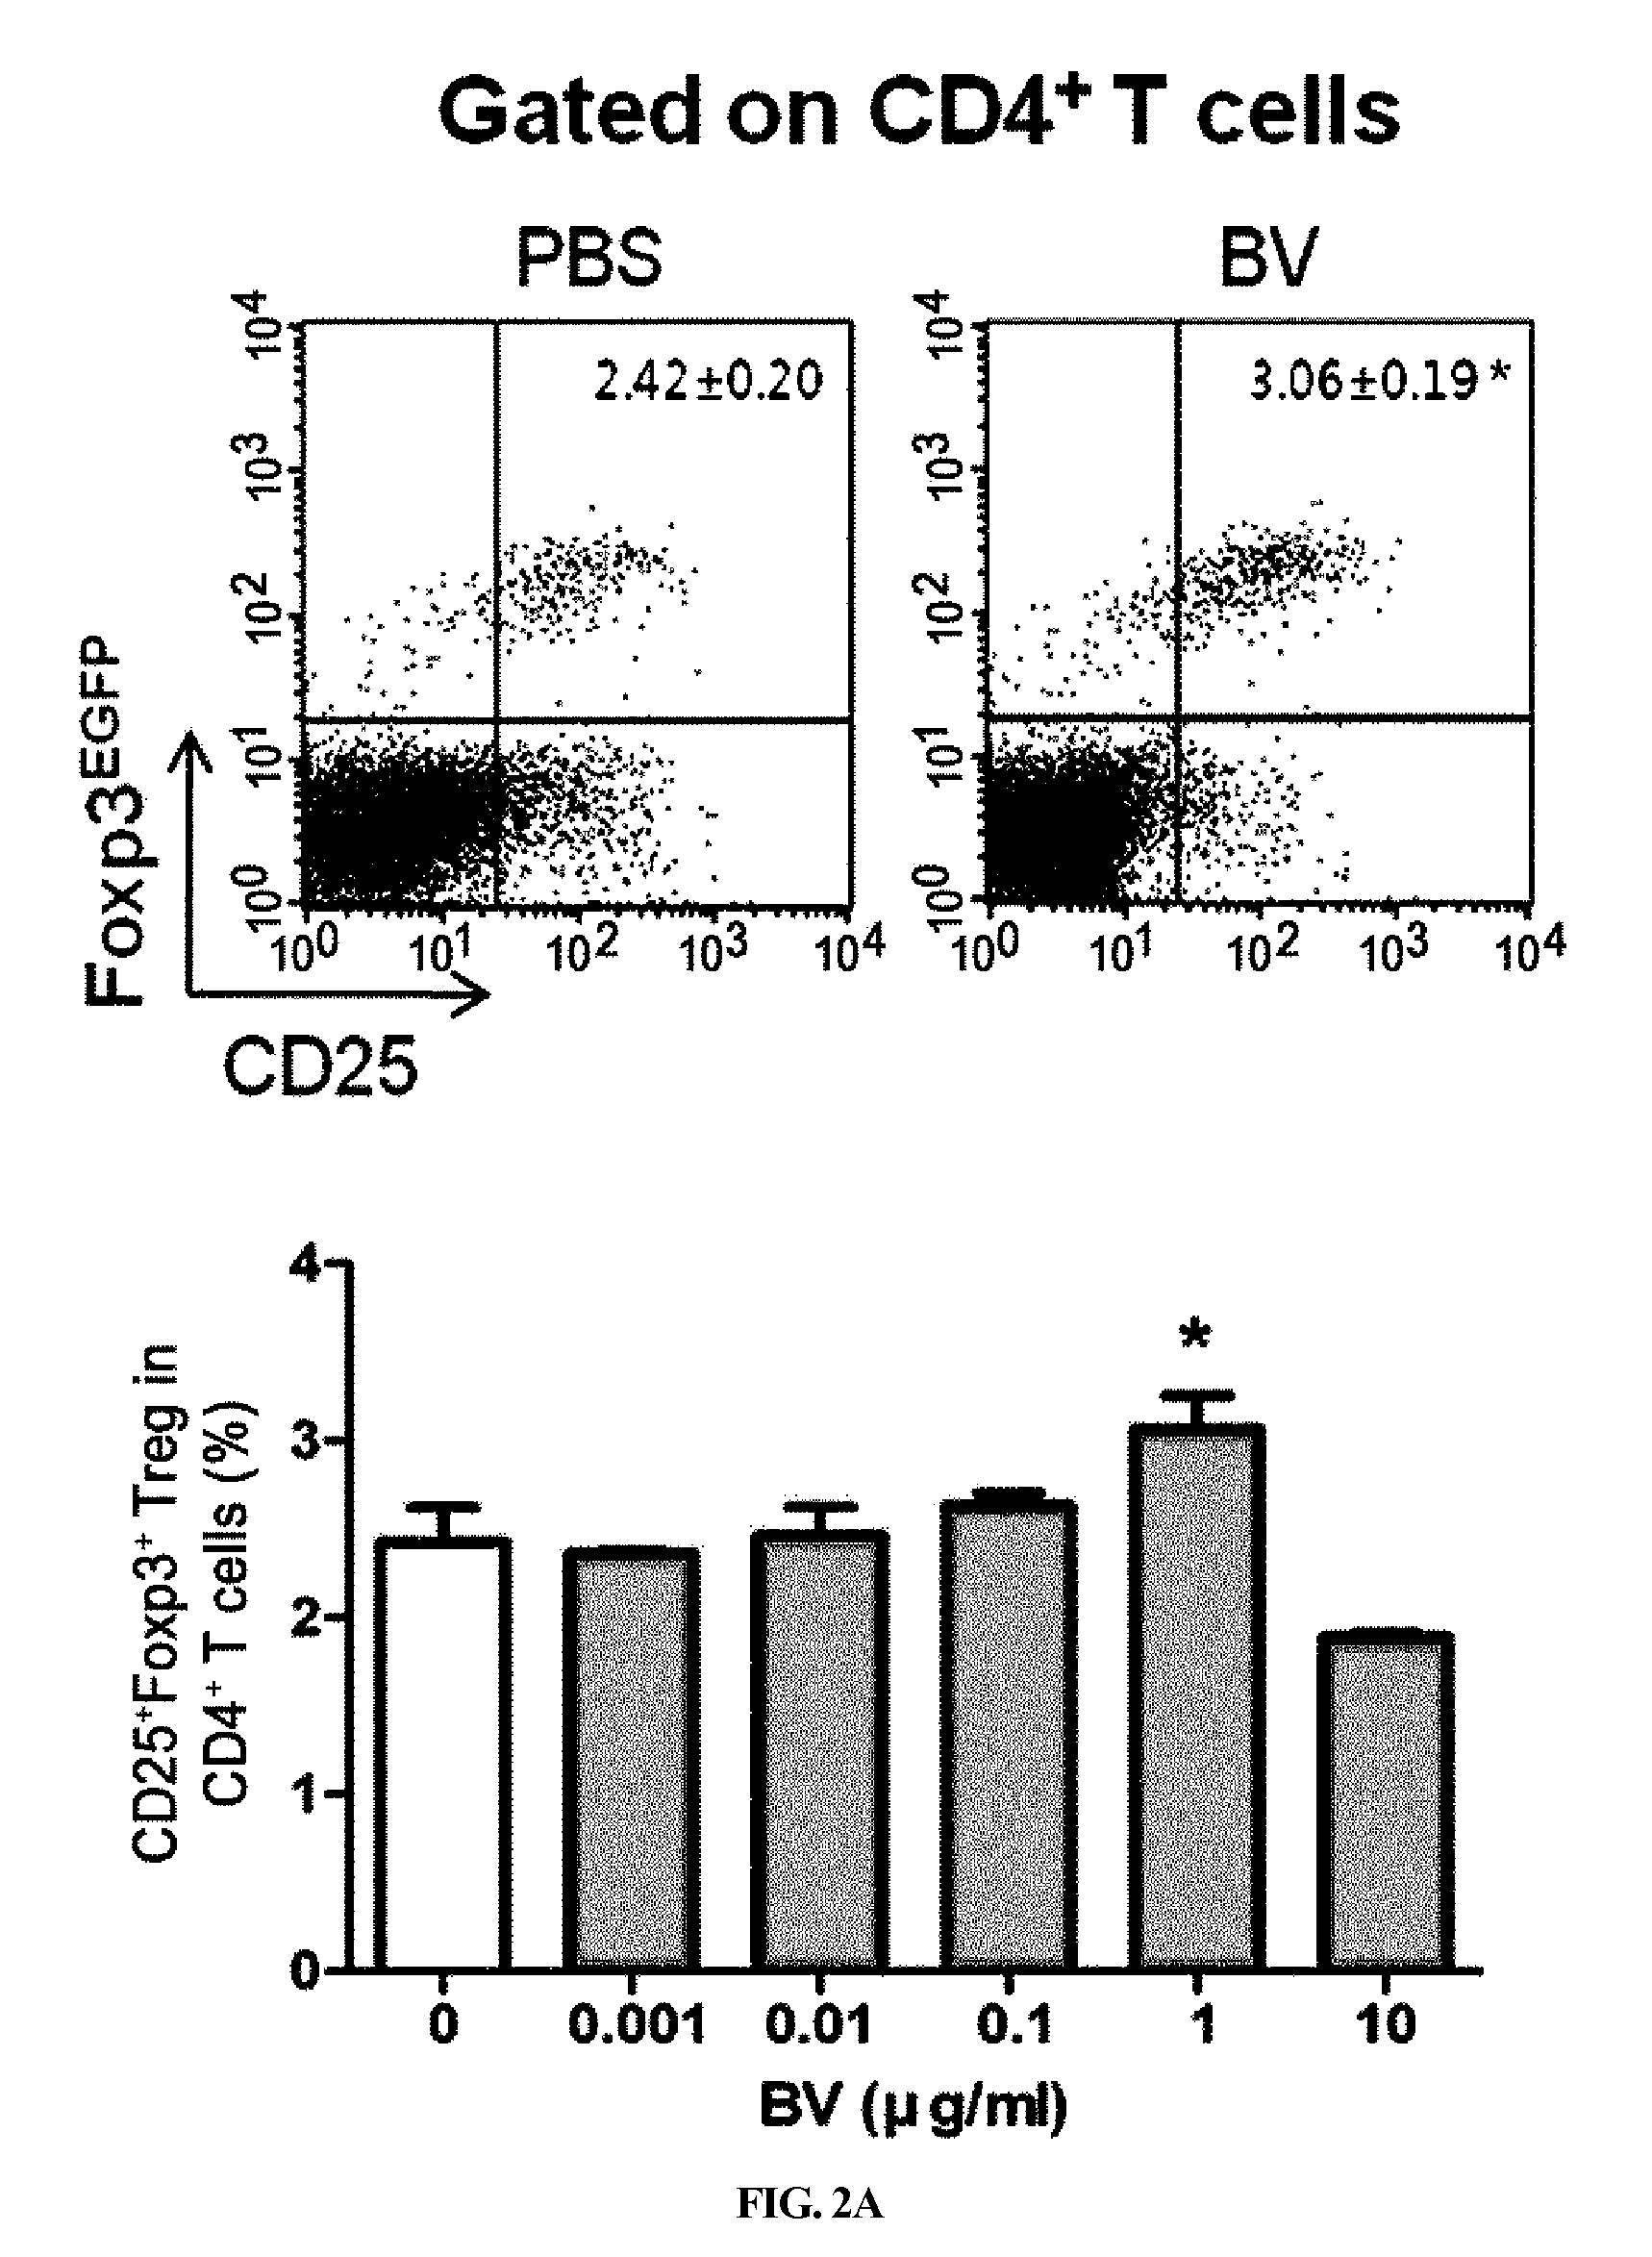 Pharmaceutical composition comprising bee venom-phospholipase A2 (BV-PLA2) for treating or preventing diseases related to degradation of abnormal regulatory T cell activity